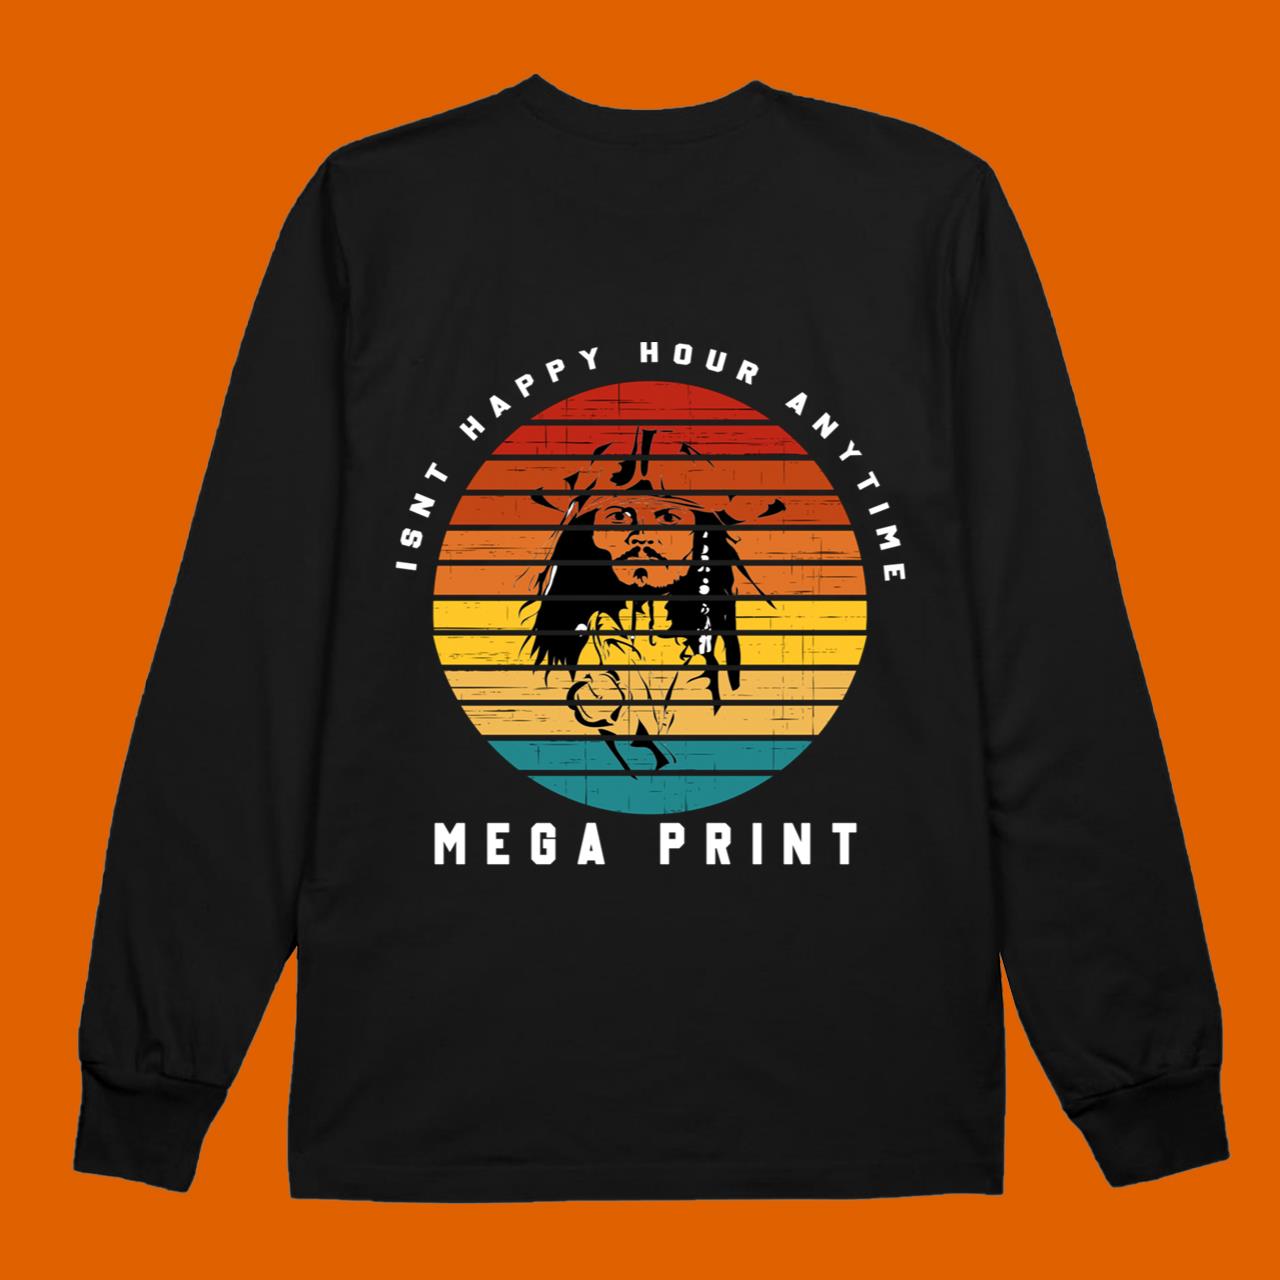 Is'nt Happy Hour Anytime Mega Print Classic T-Shirt